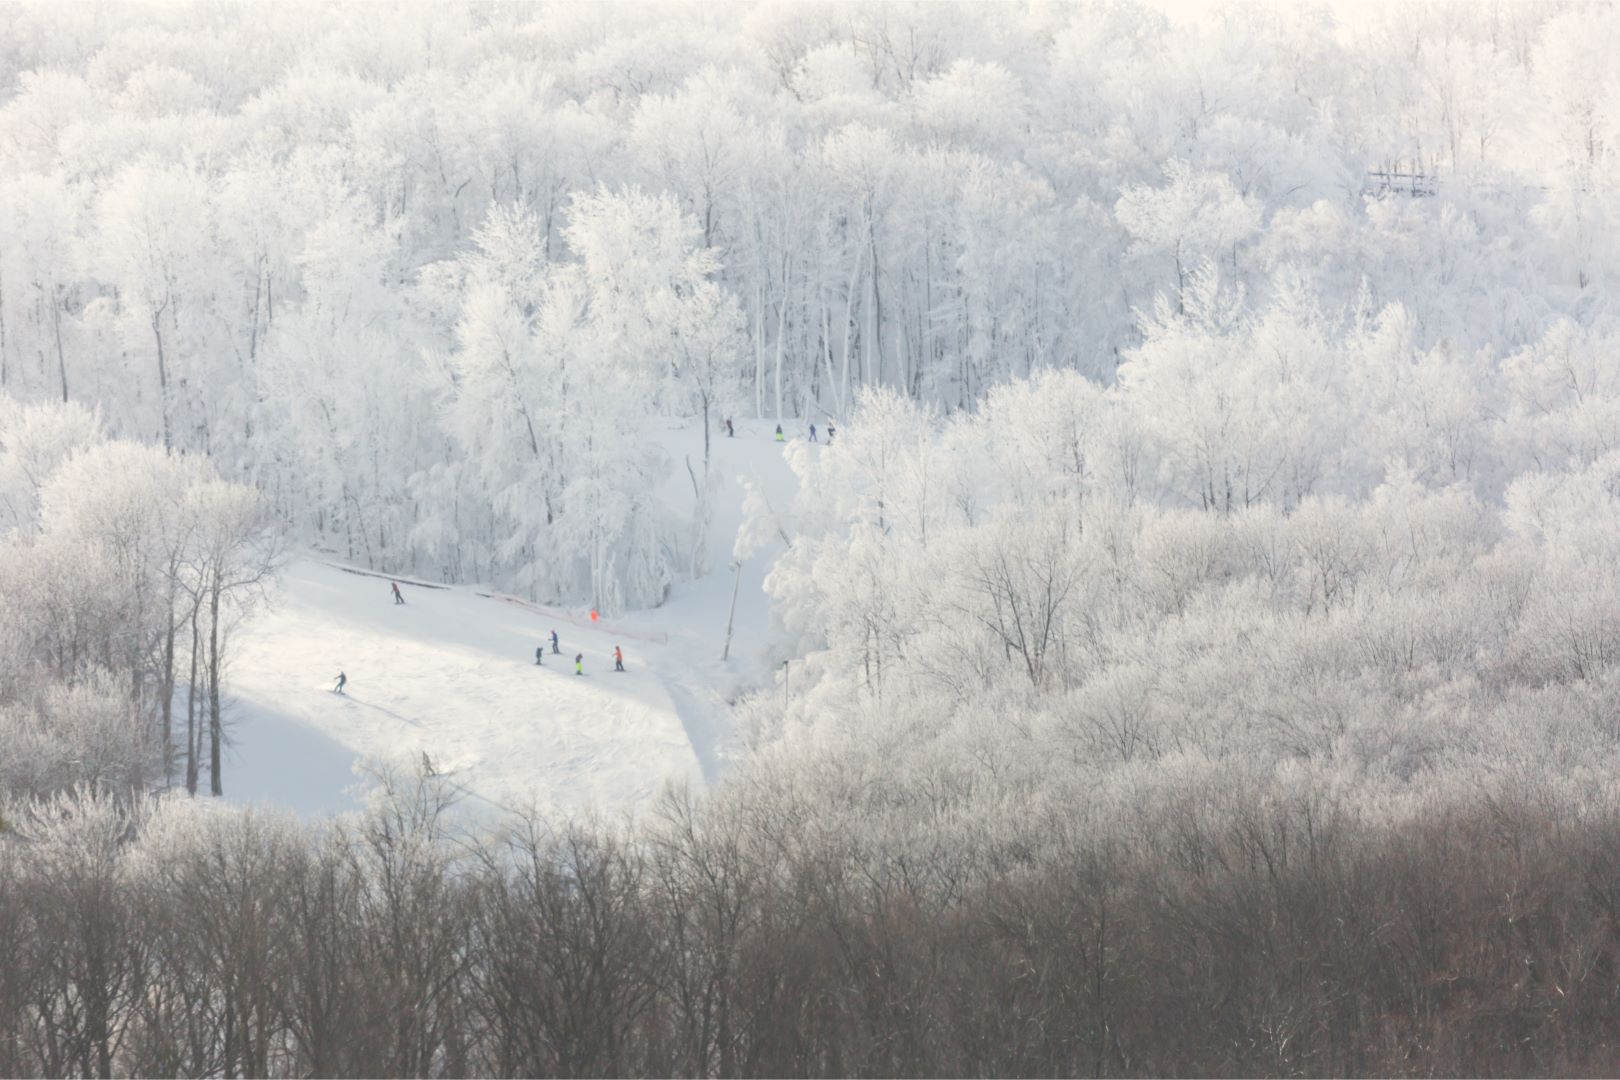 Wisconsin skiers amidst a snowy forest